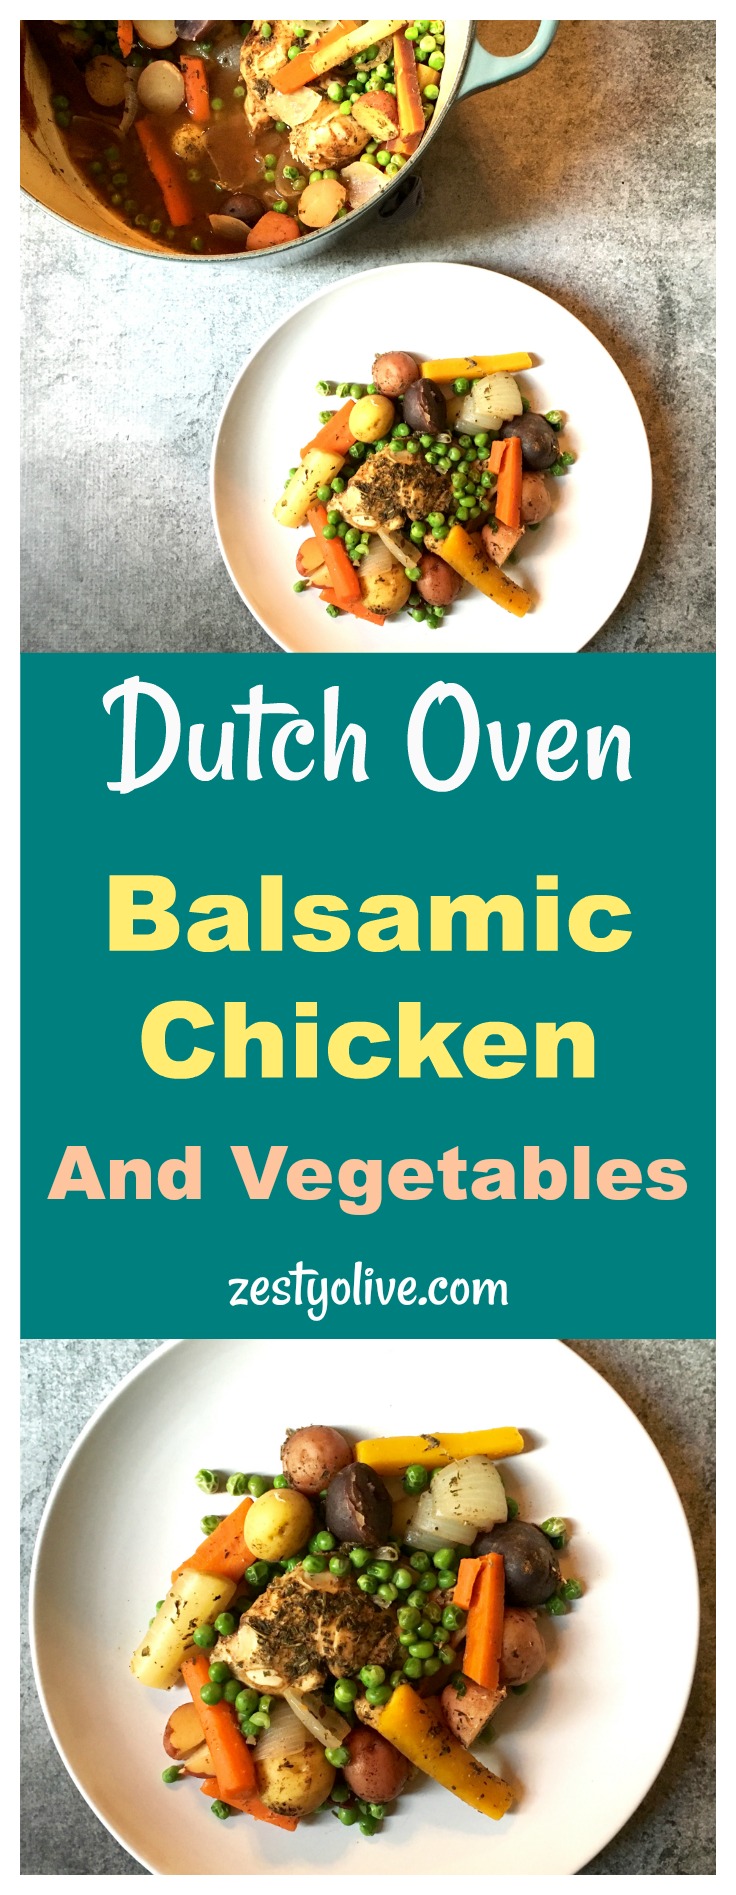 Dutch Oven Balsamic Chicken and Vegetables